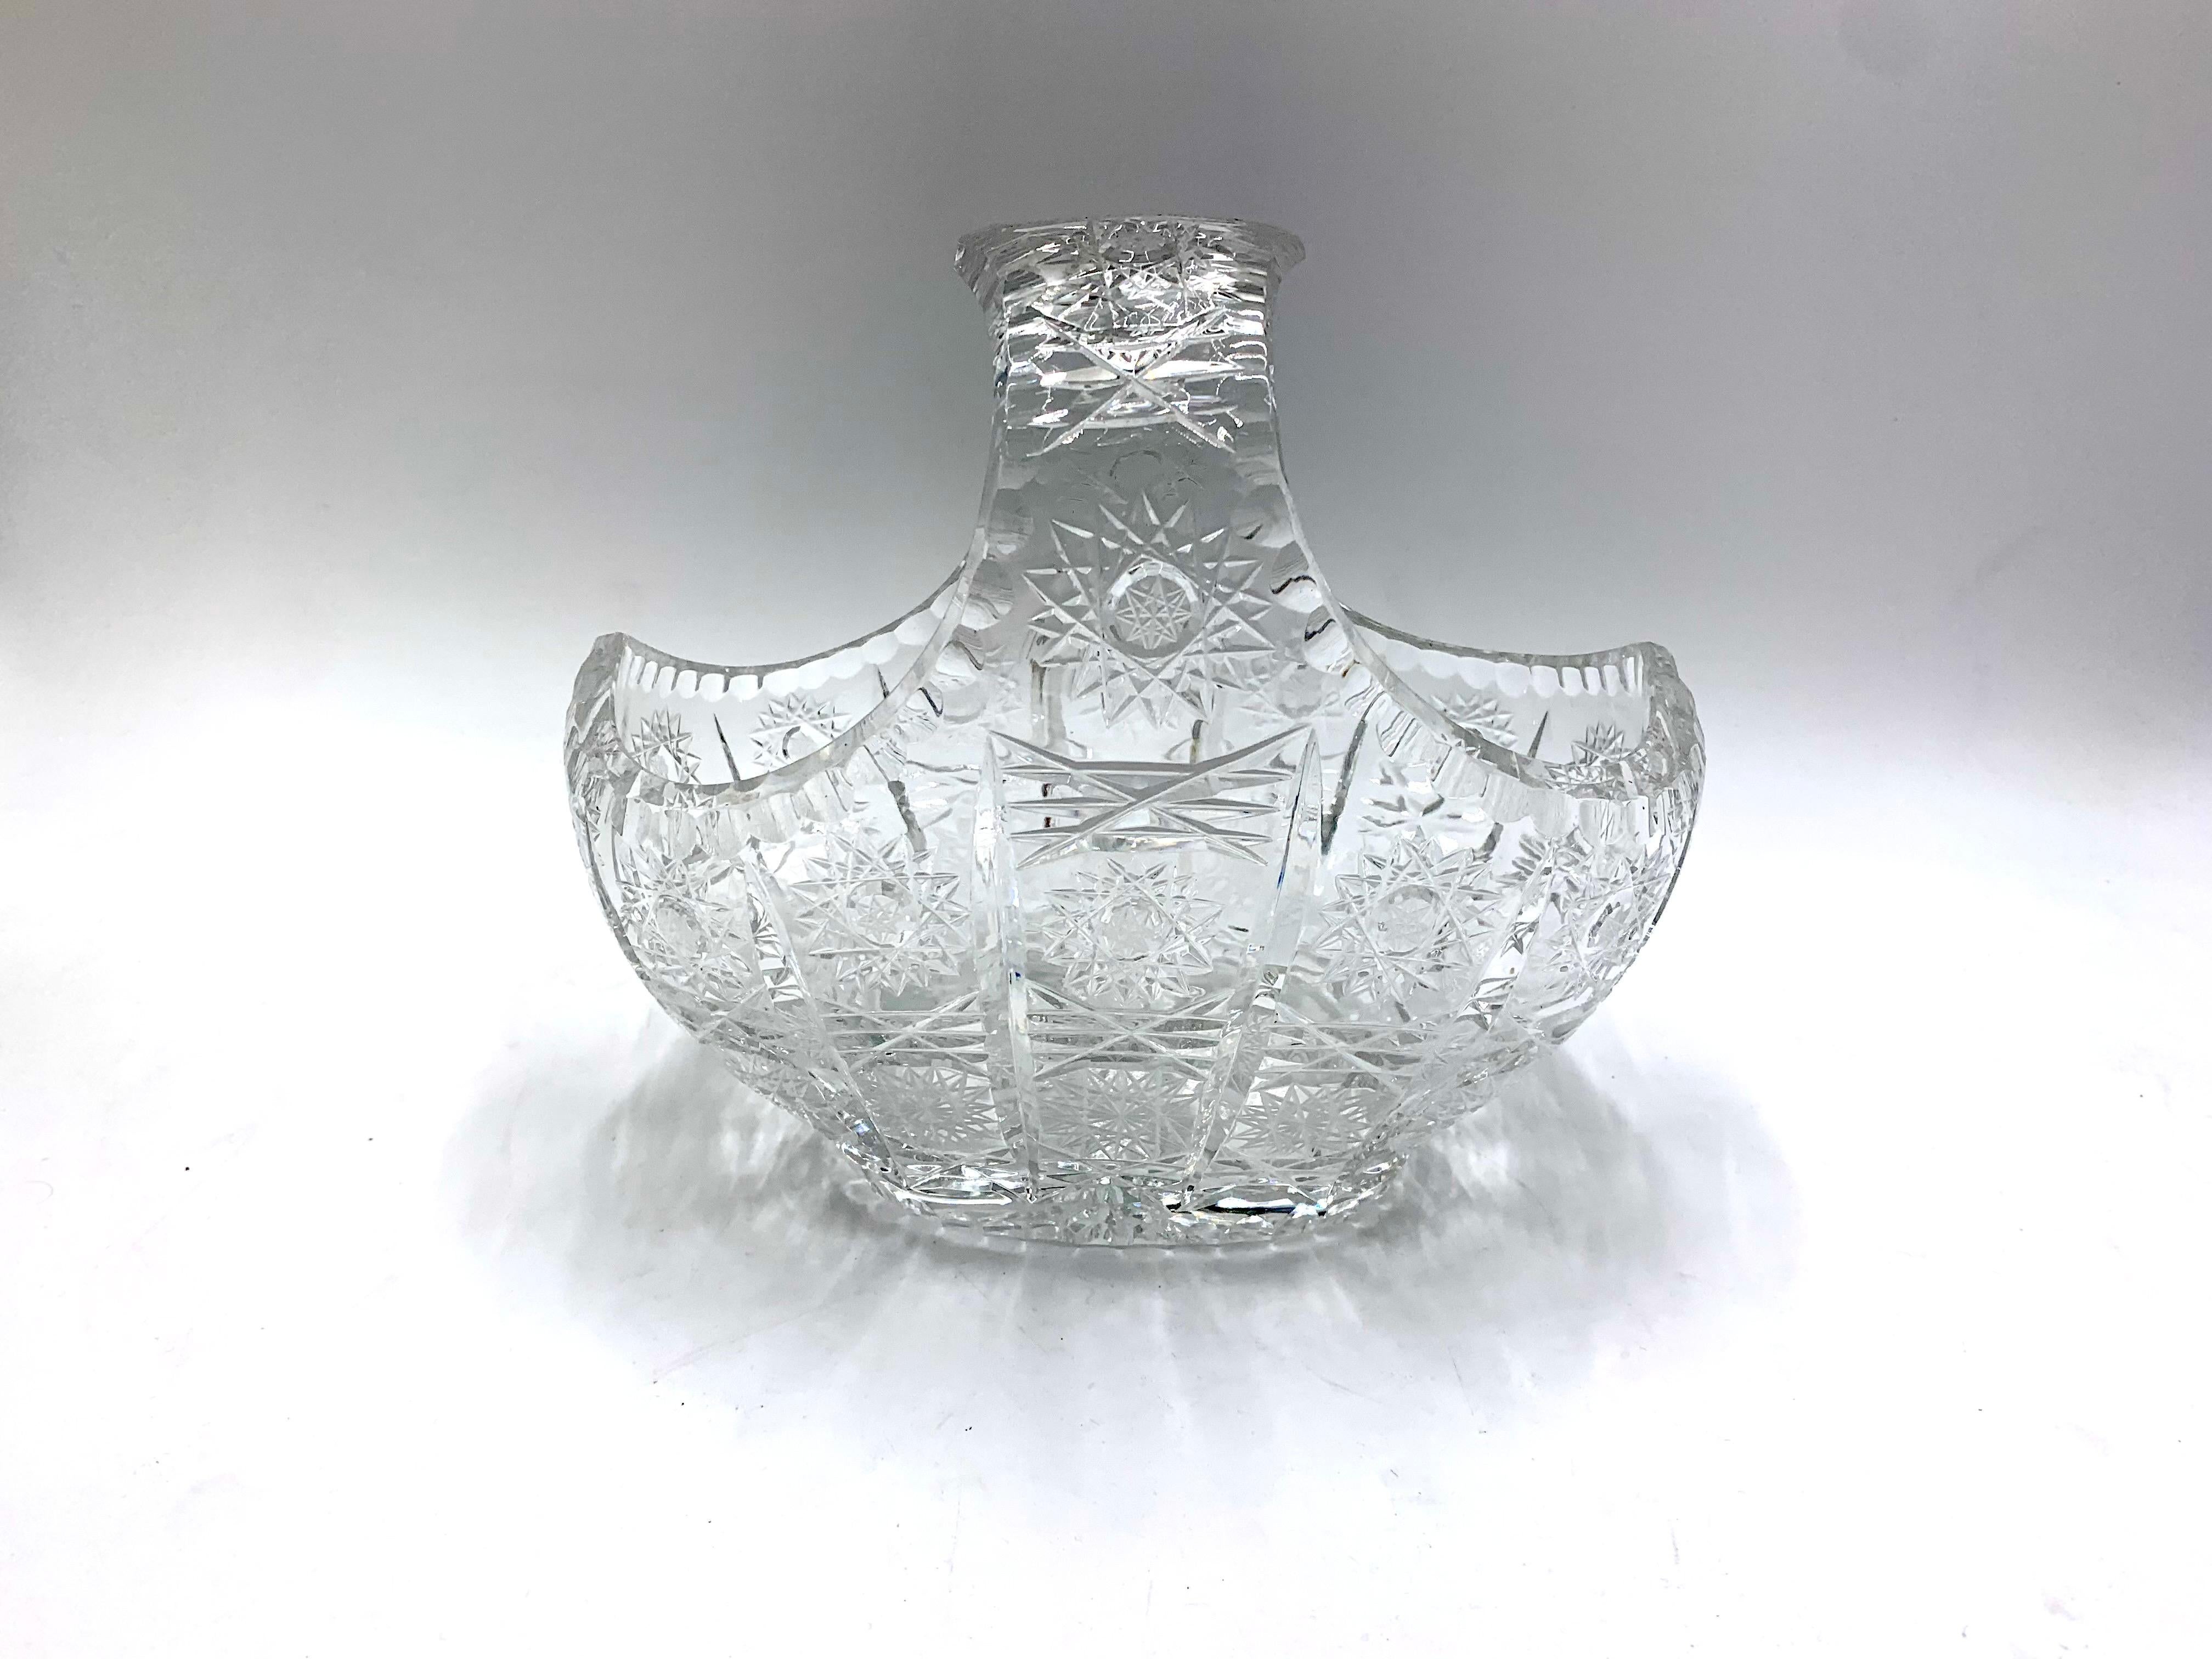 Big clear crystal decorative basket - a bowl 
for sweets or fruits.
Very good condition, very heavy. 
No damage.